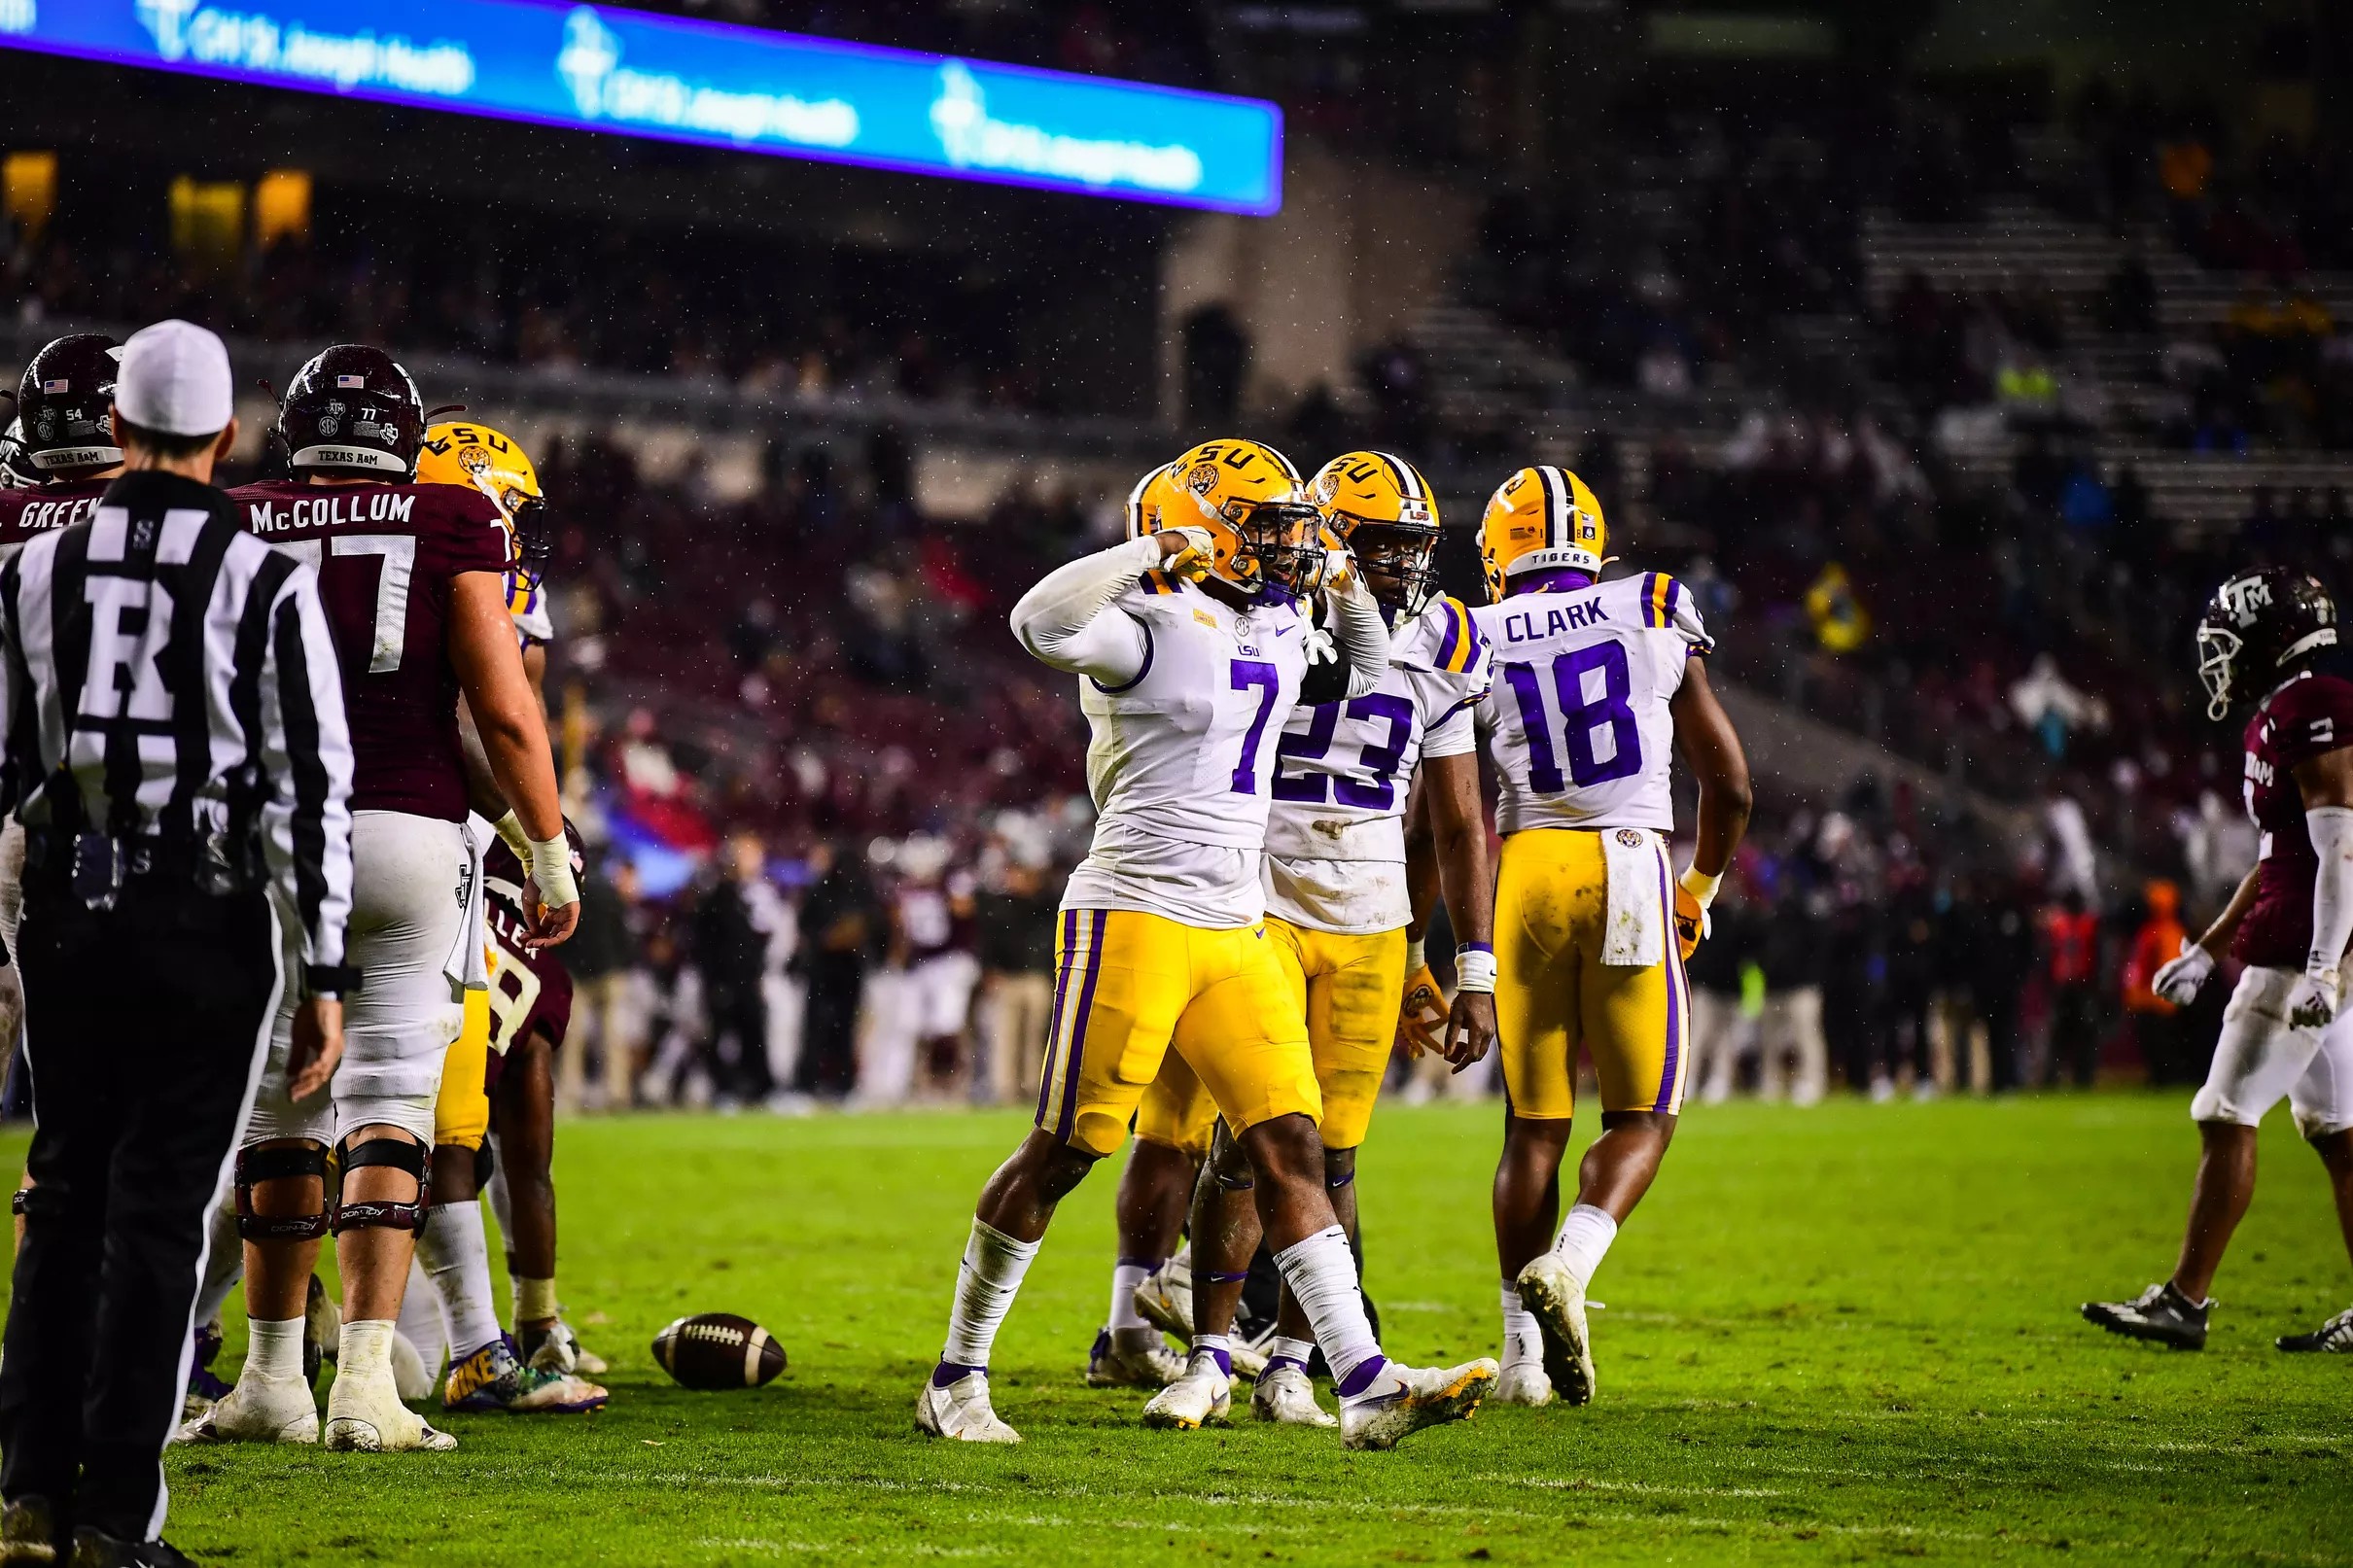 Alabama Football vs. LSU Preview Q&A with And The Valley Shook